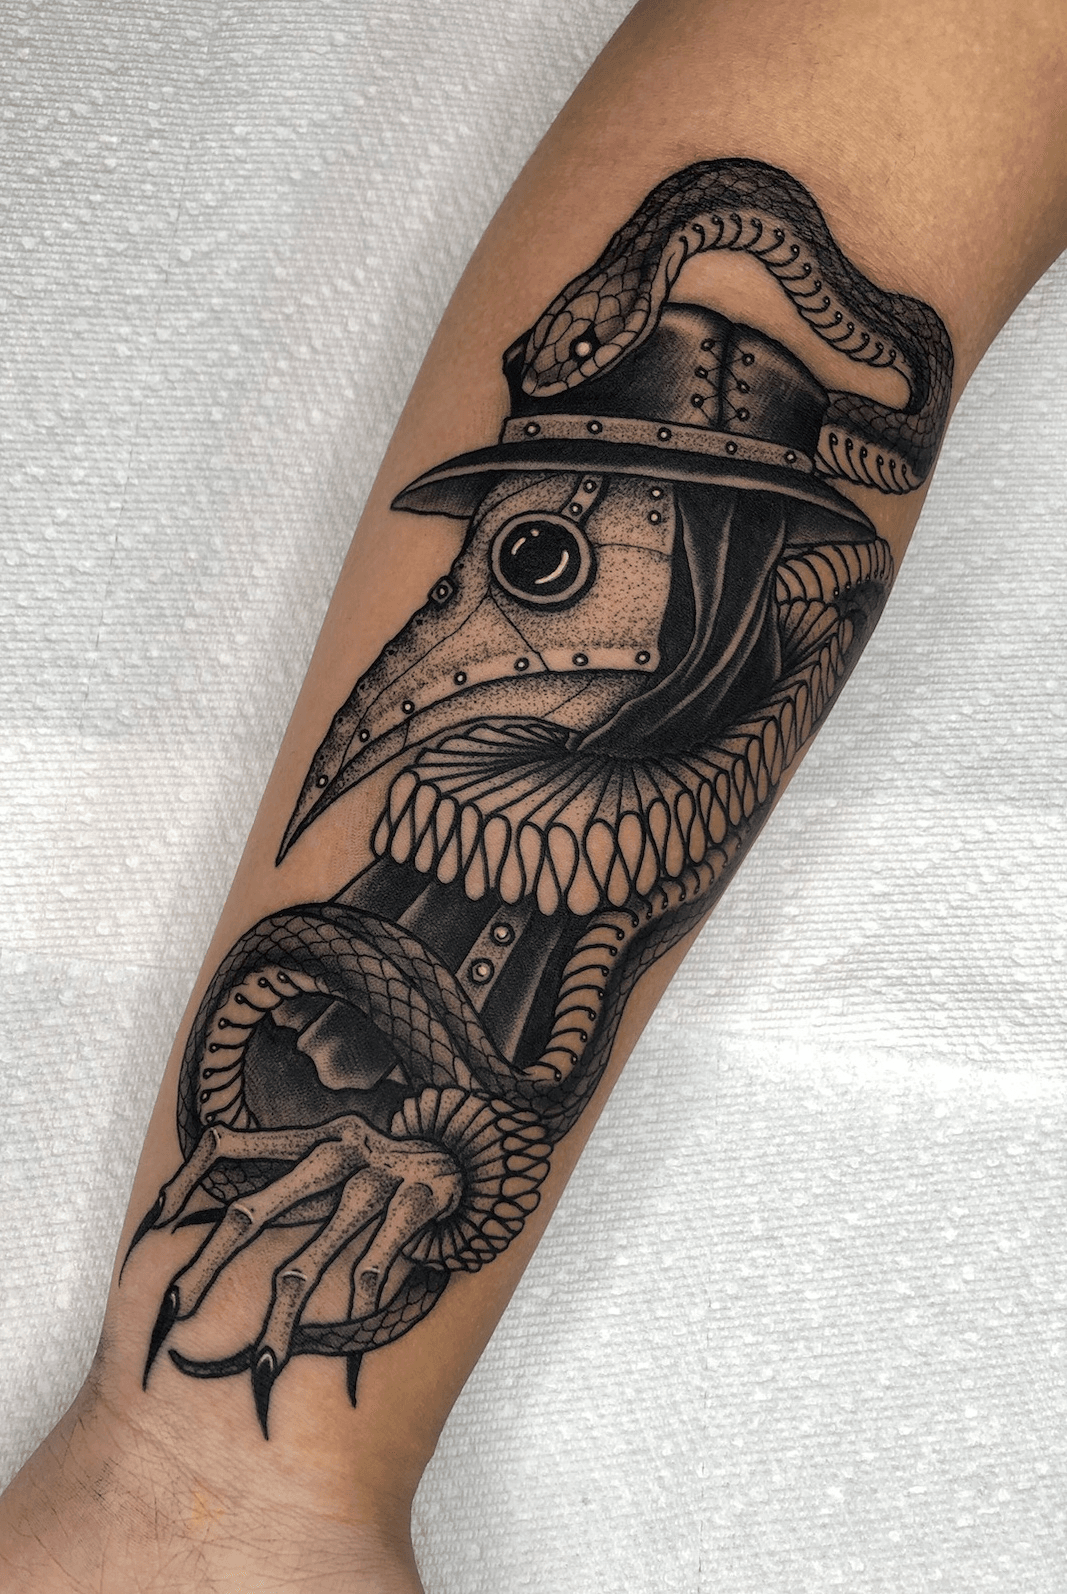 By Rhiannon Winters at Tusk Tattoo in Scranton Pa  rtraditionaltattoos